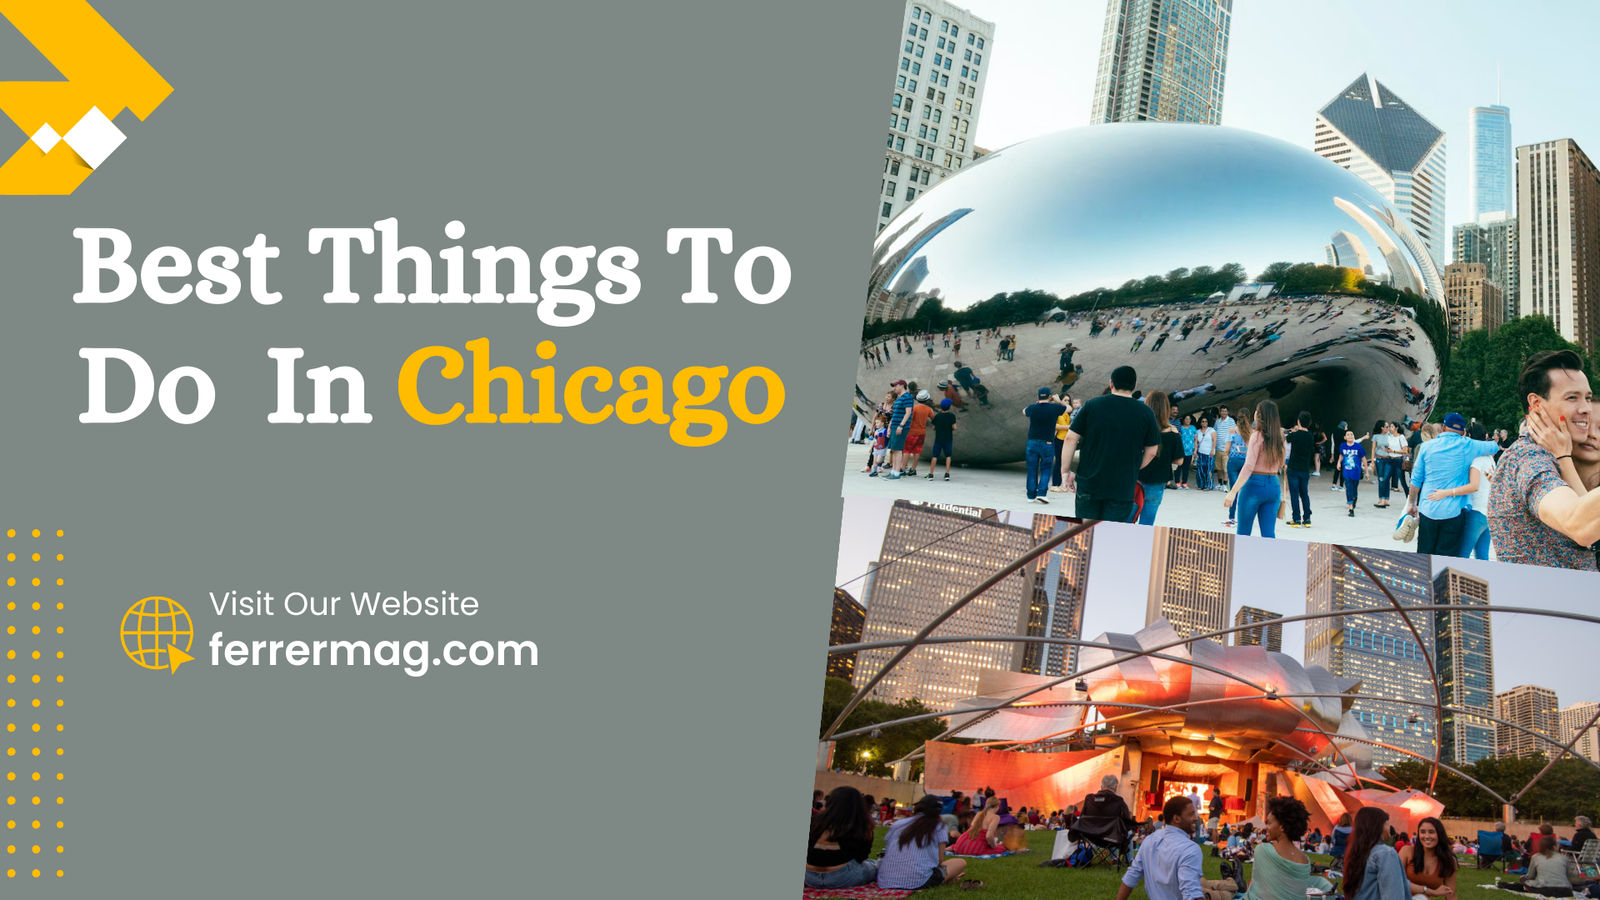 Best Things To Do In Chicago